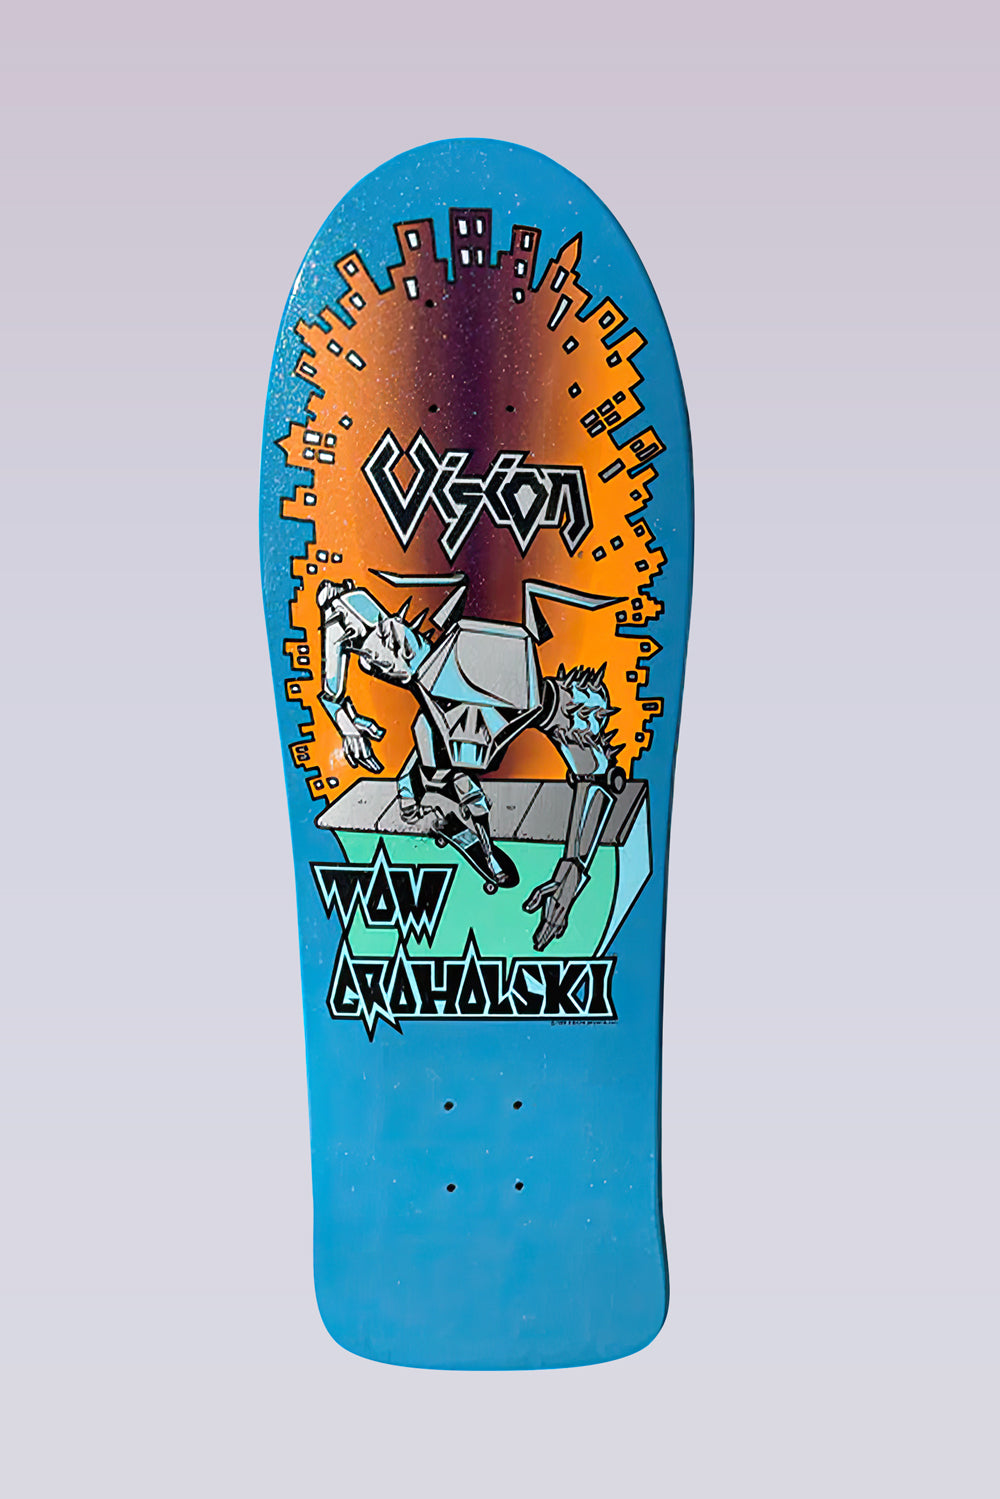 Limited Groholski Robot Deck-Special Pearl - Skateboard Hall of Fame - 9.5"X29.5" - Blue Pearl